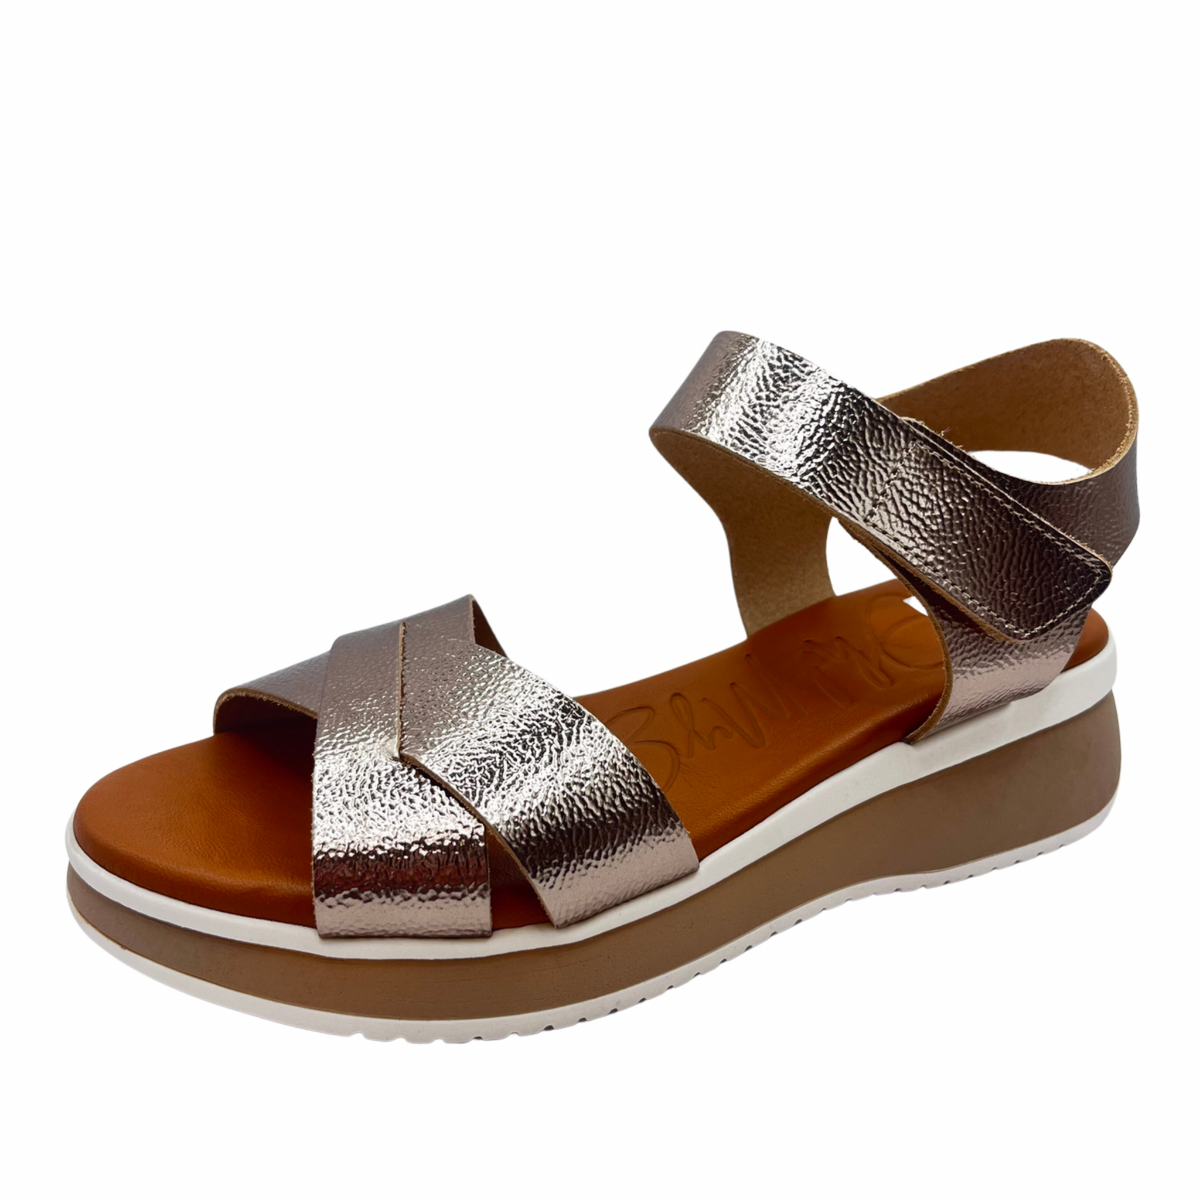 Oh My Sandals Gold Low Wedge Leather Sandal